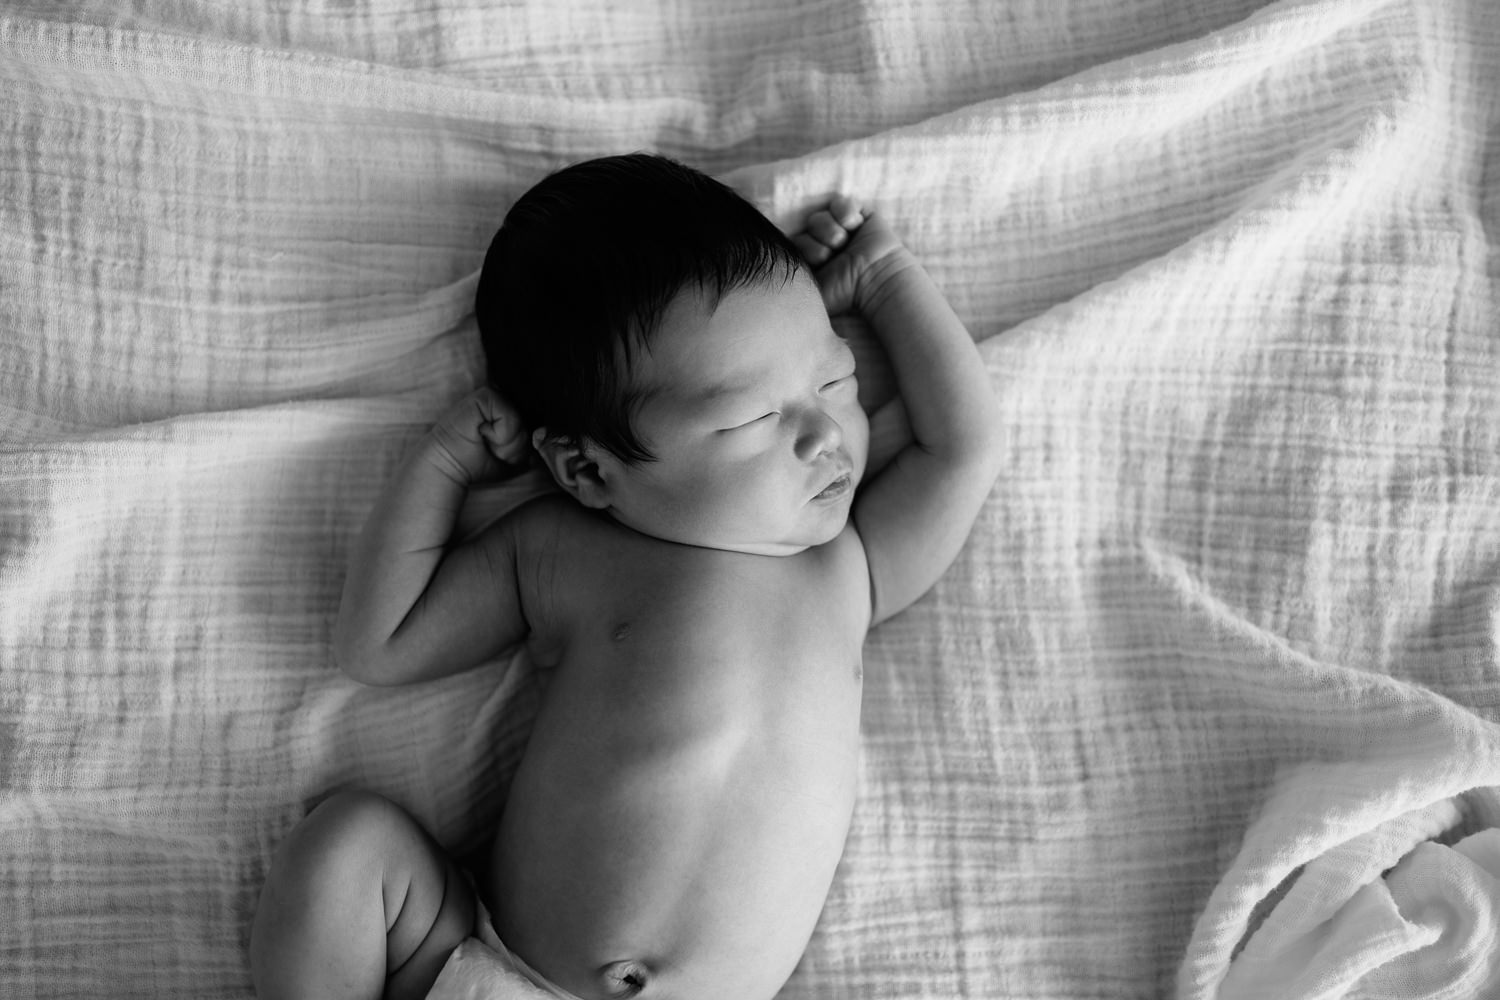 2 week old baby boy with long dark hair in diaper lying on bed, arms up by face, stretching, head to side, sleeping - Markham Lifestyle Photography